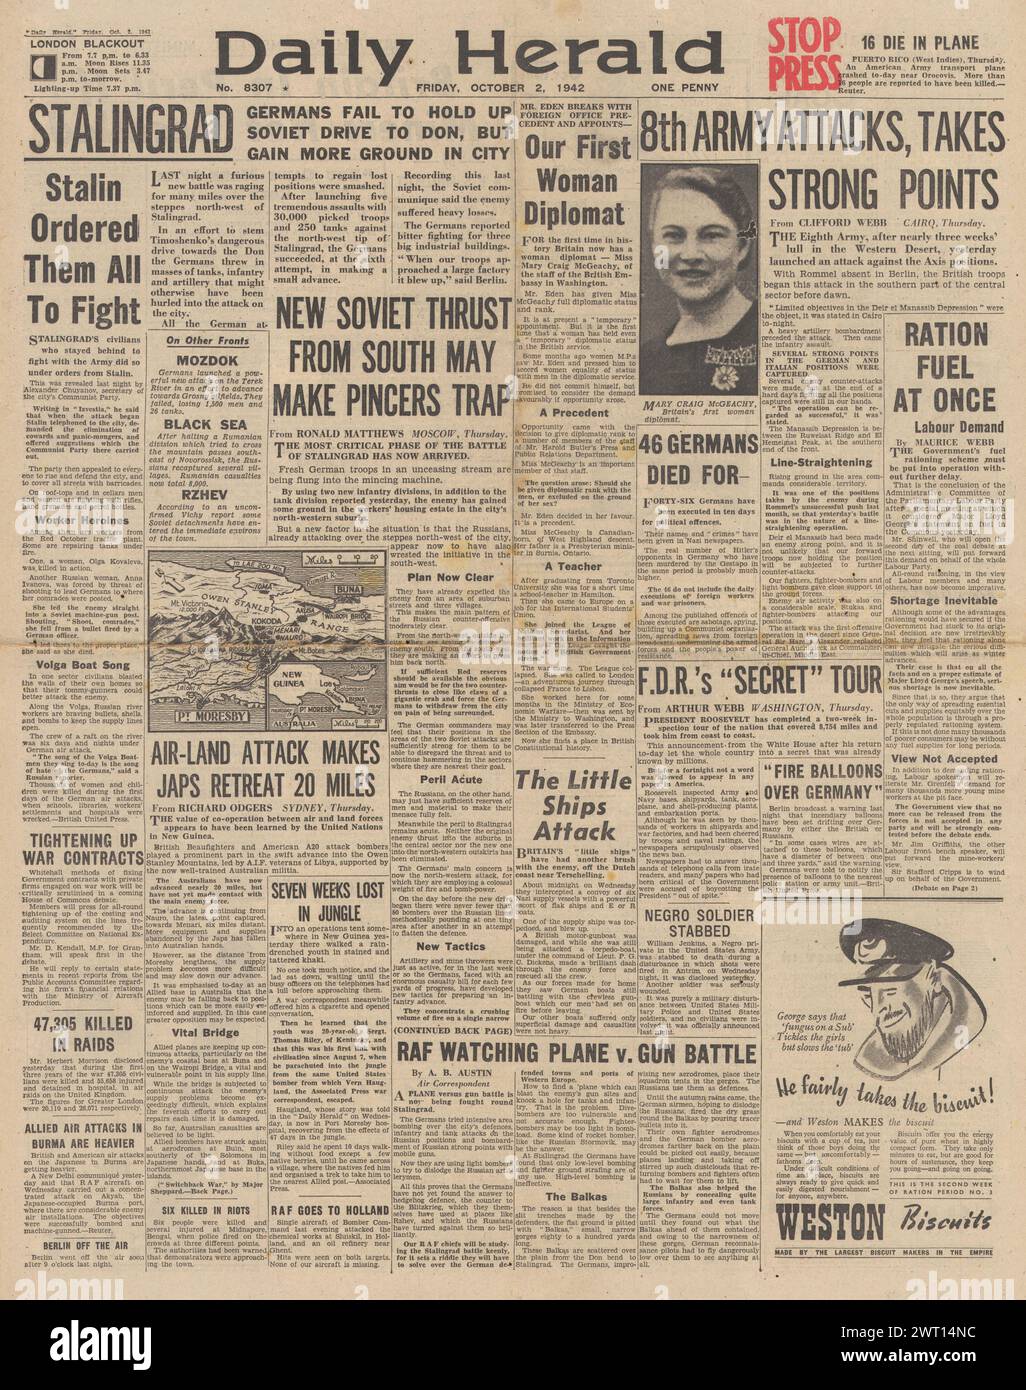 1942 Daily Herald front page reporting Battle of Stalingrad and British Army attack in North Africa Stock Photo